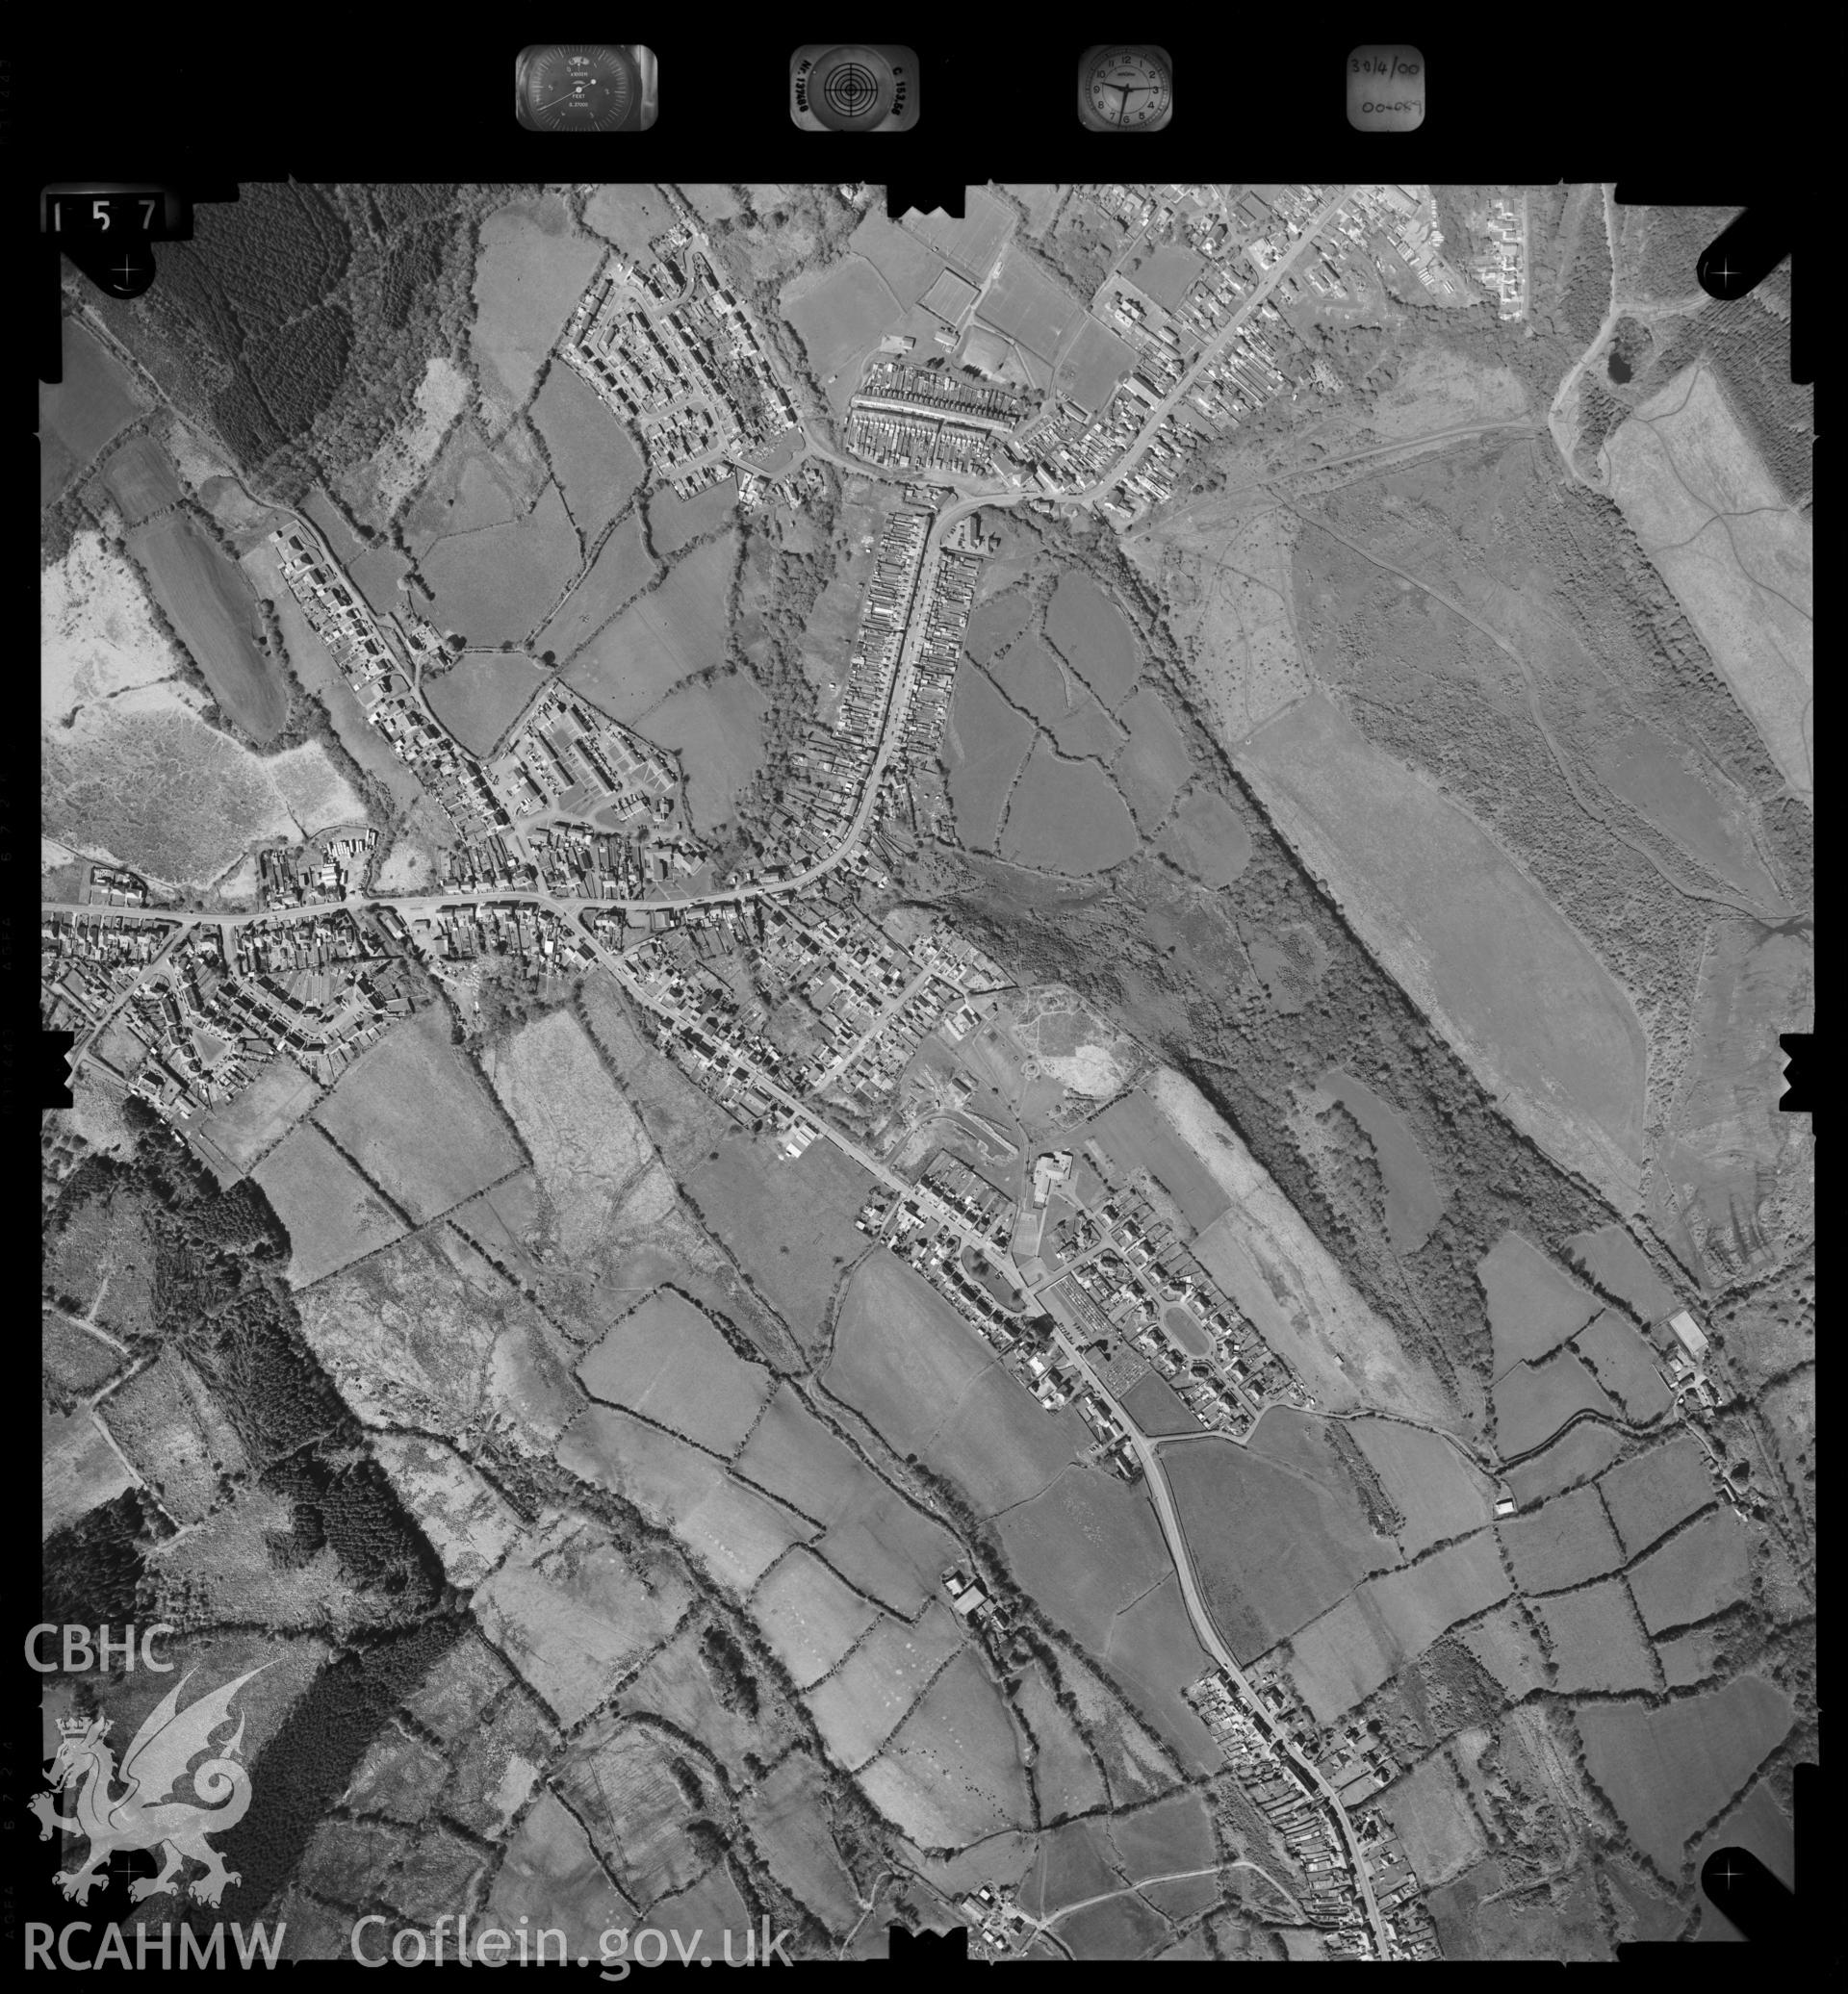 Digital copy of an Ordnance Survey aerial view of the Tumble area, dated 2000.